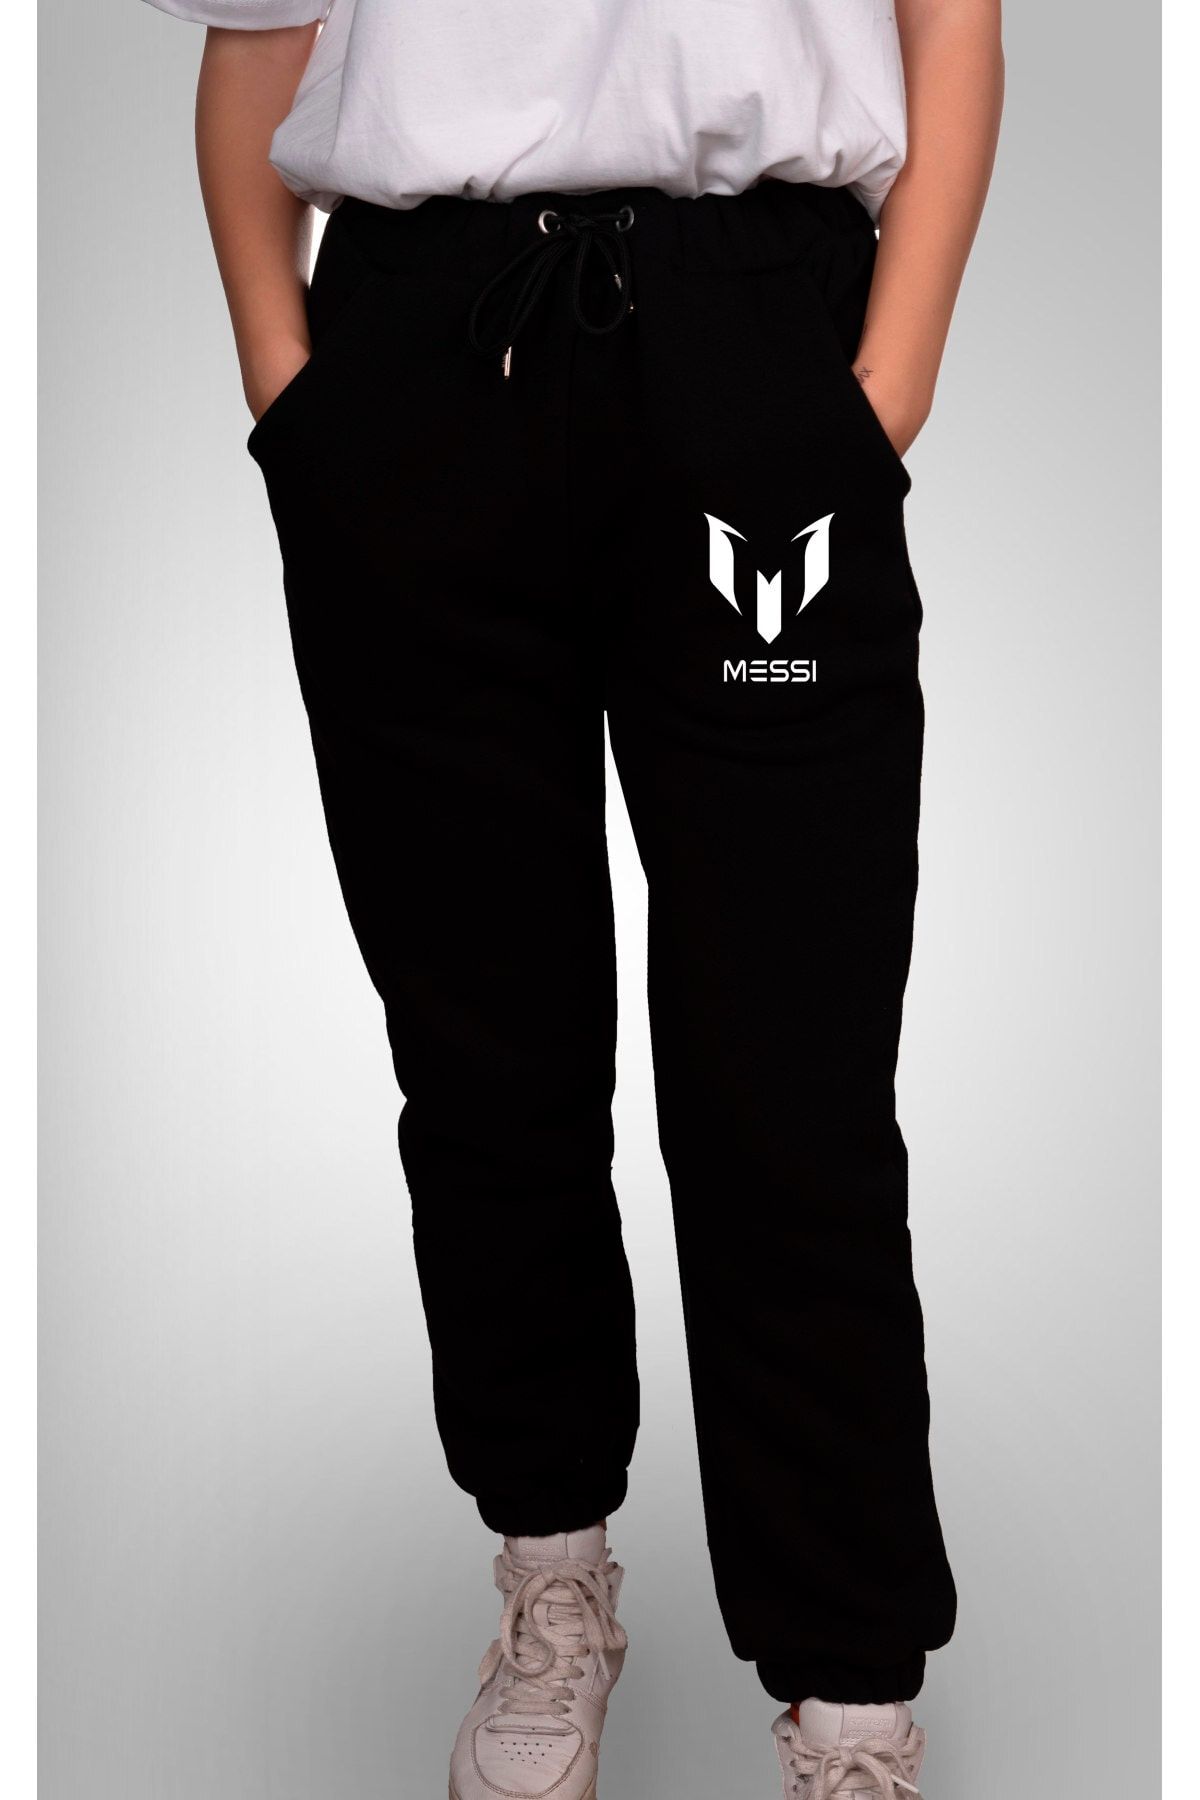 Mix Lower Mens Track Pants at Rs 199/piece in Surat | ID: 23241957833